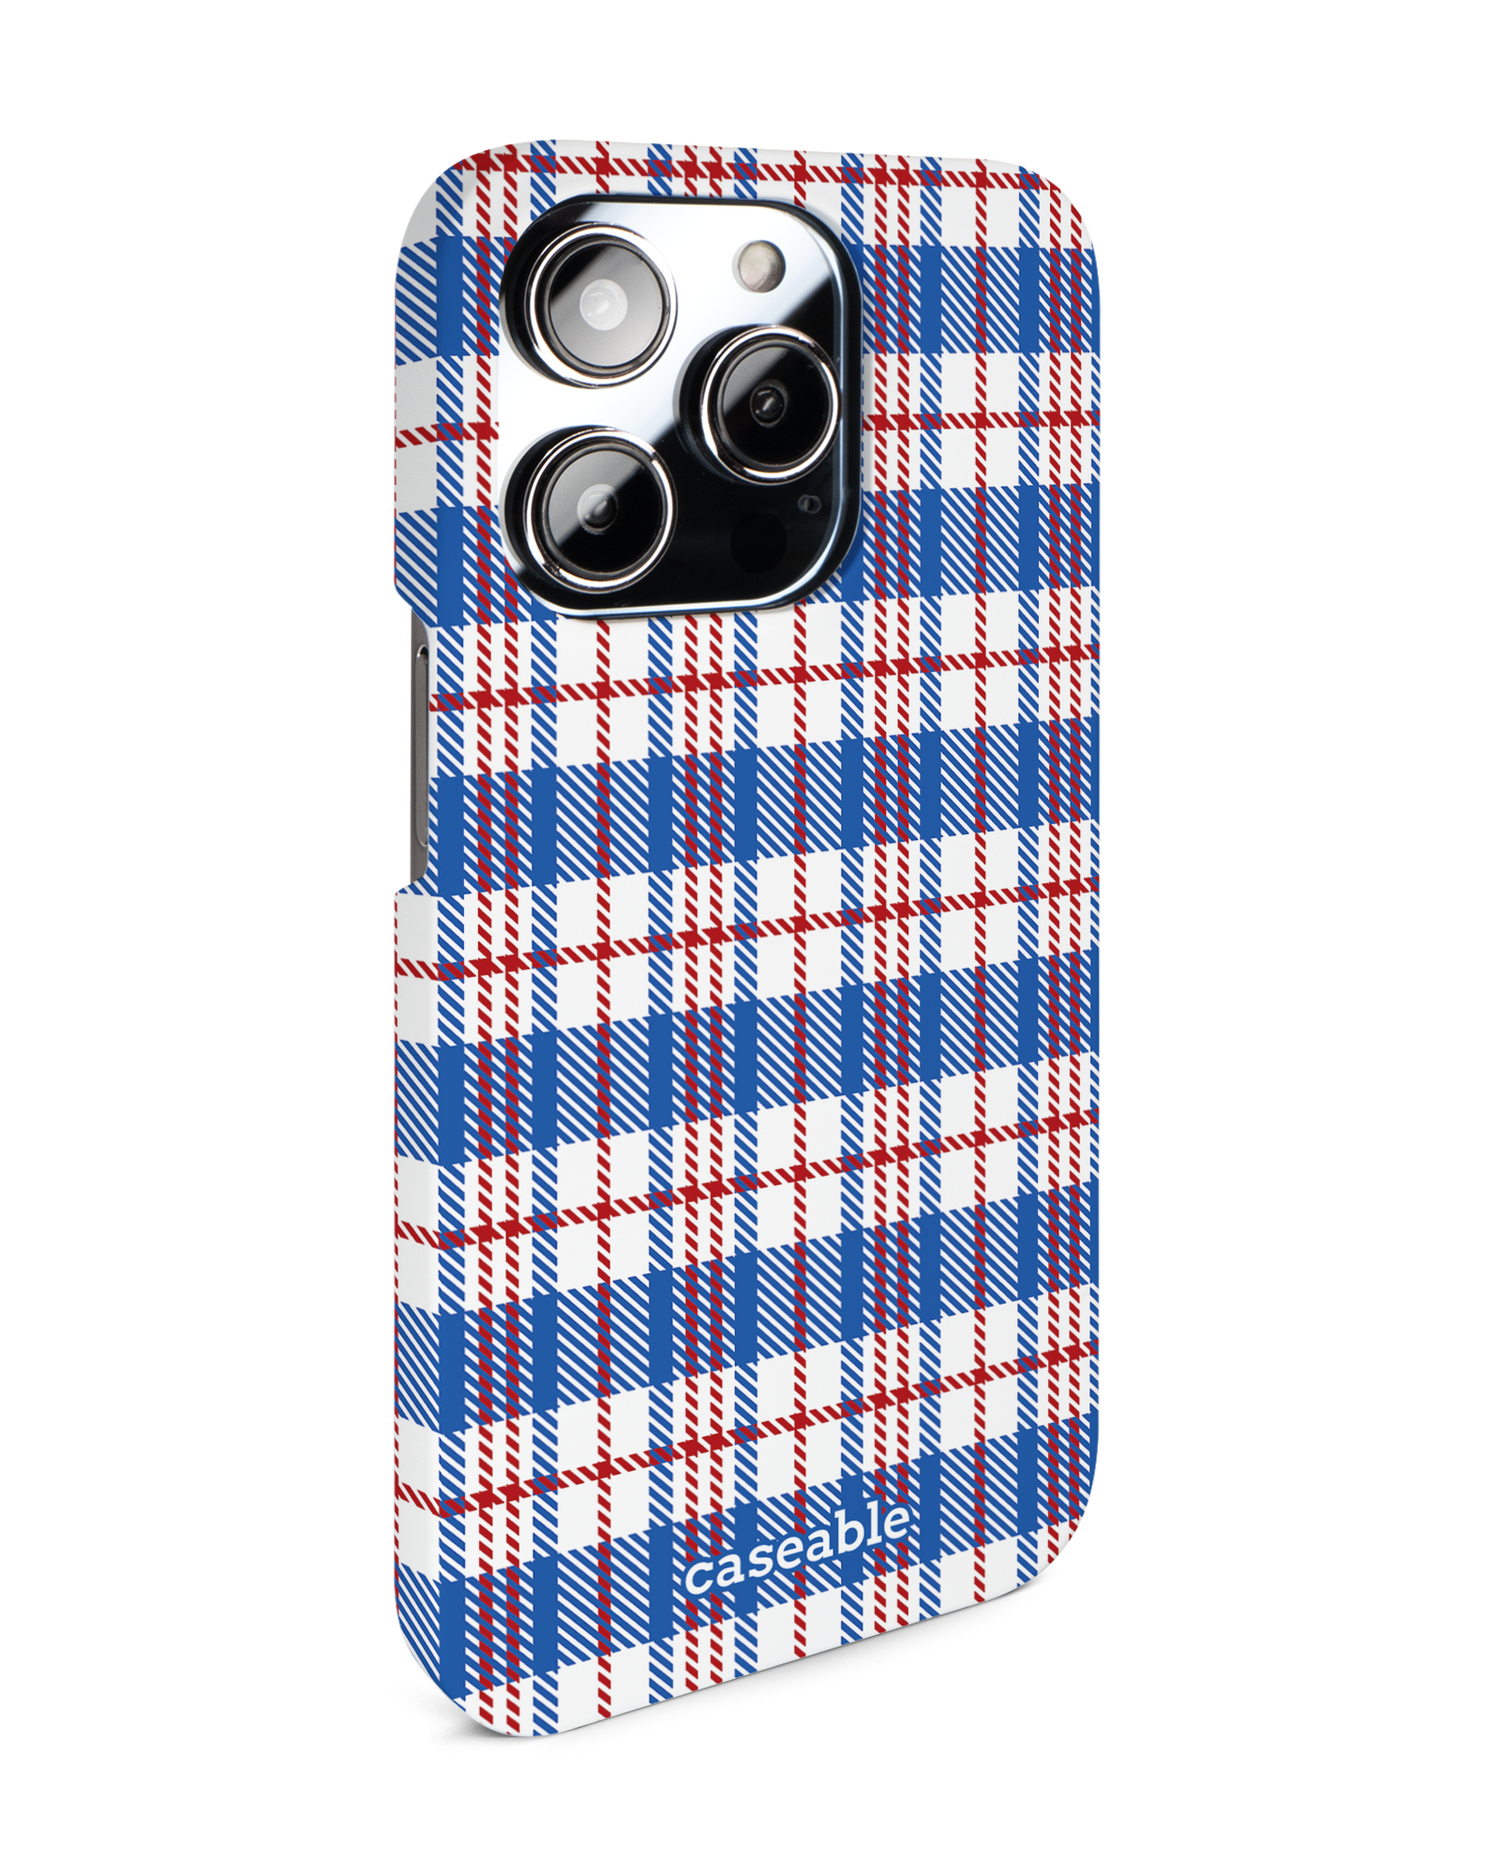 Plaid Market Bag Hard Shell Phone Case for Apple iPhone 14 Pro: View from the left side